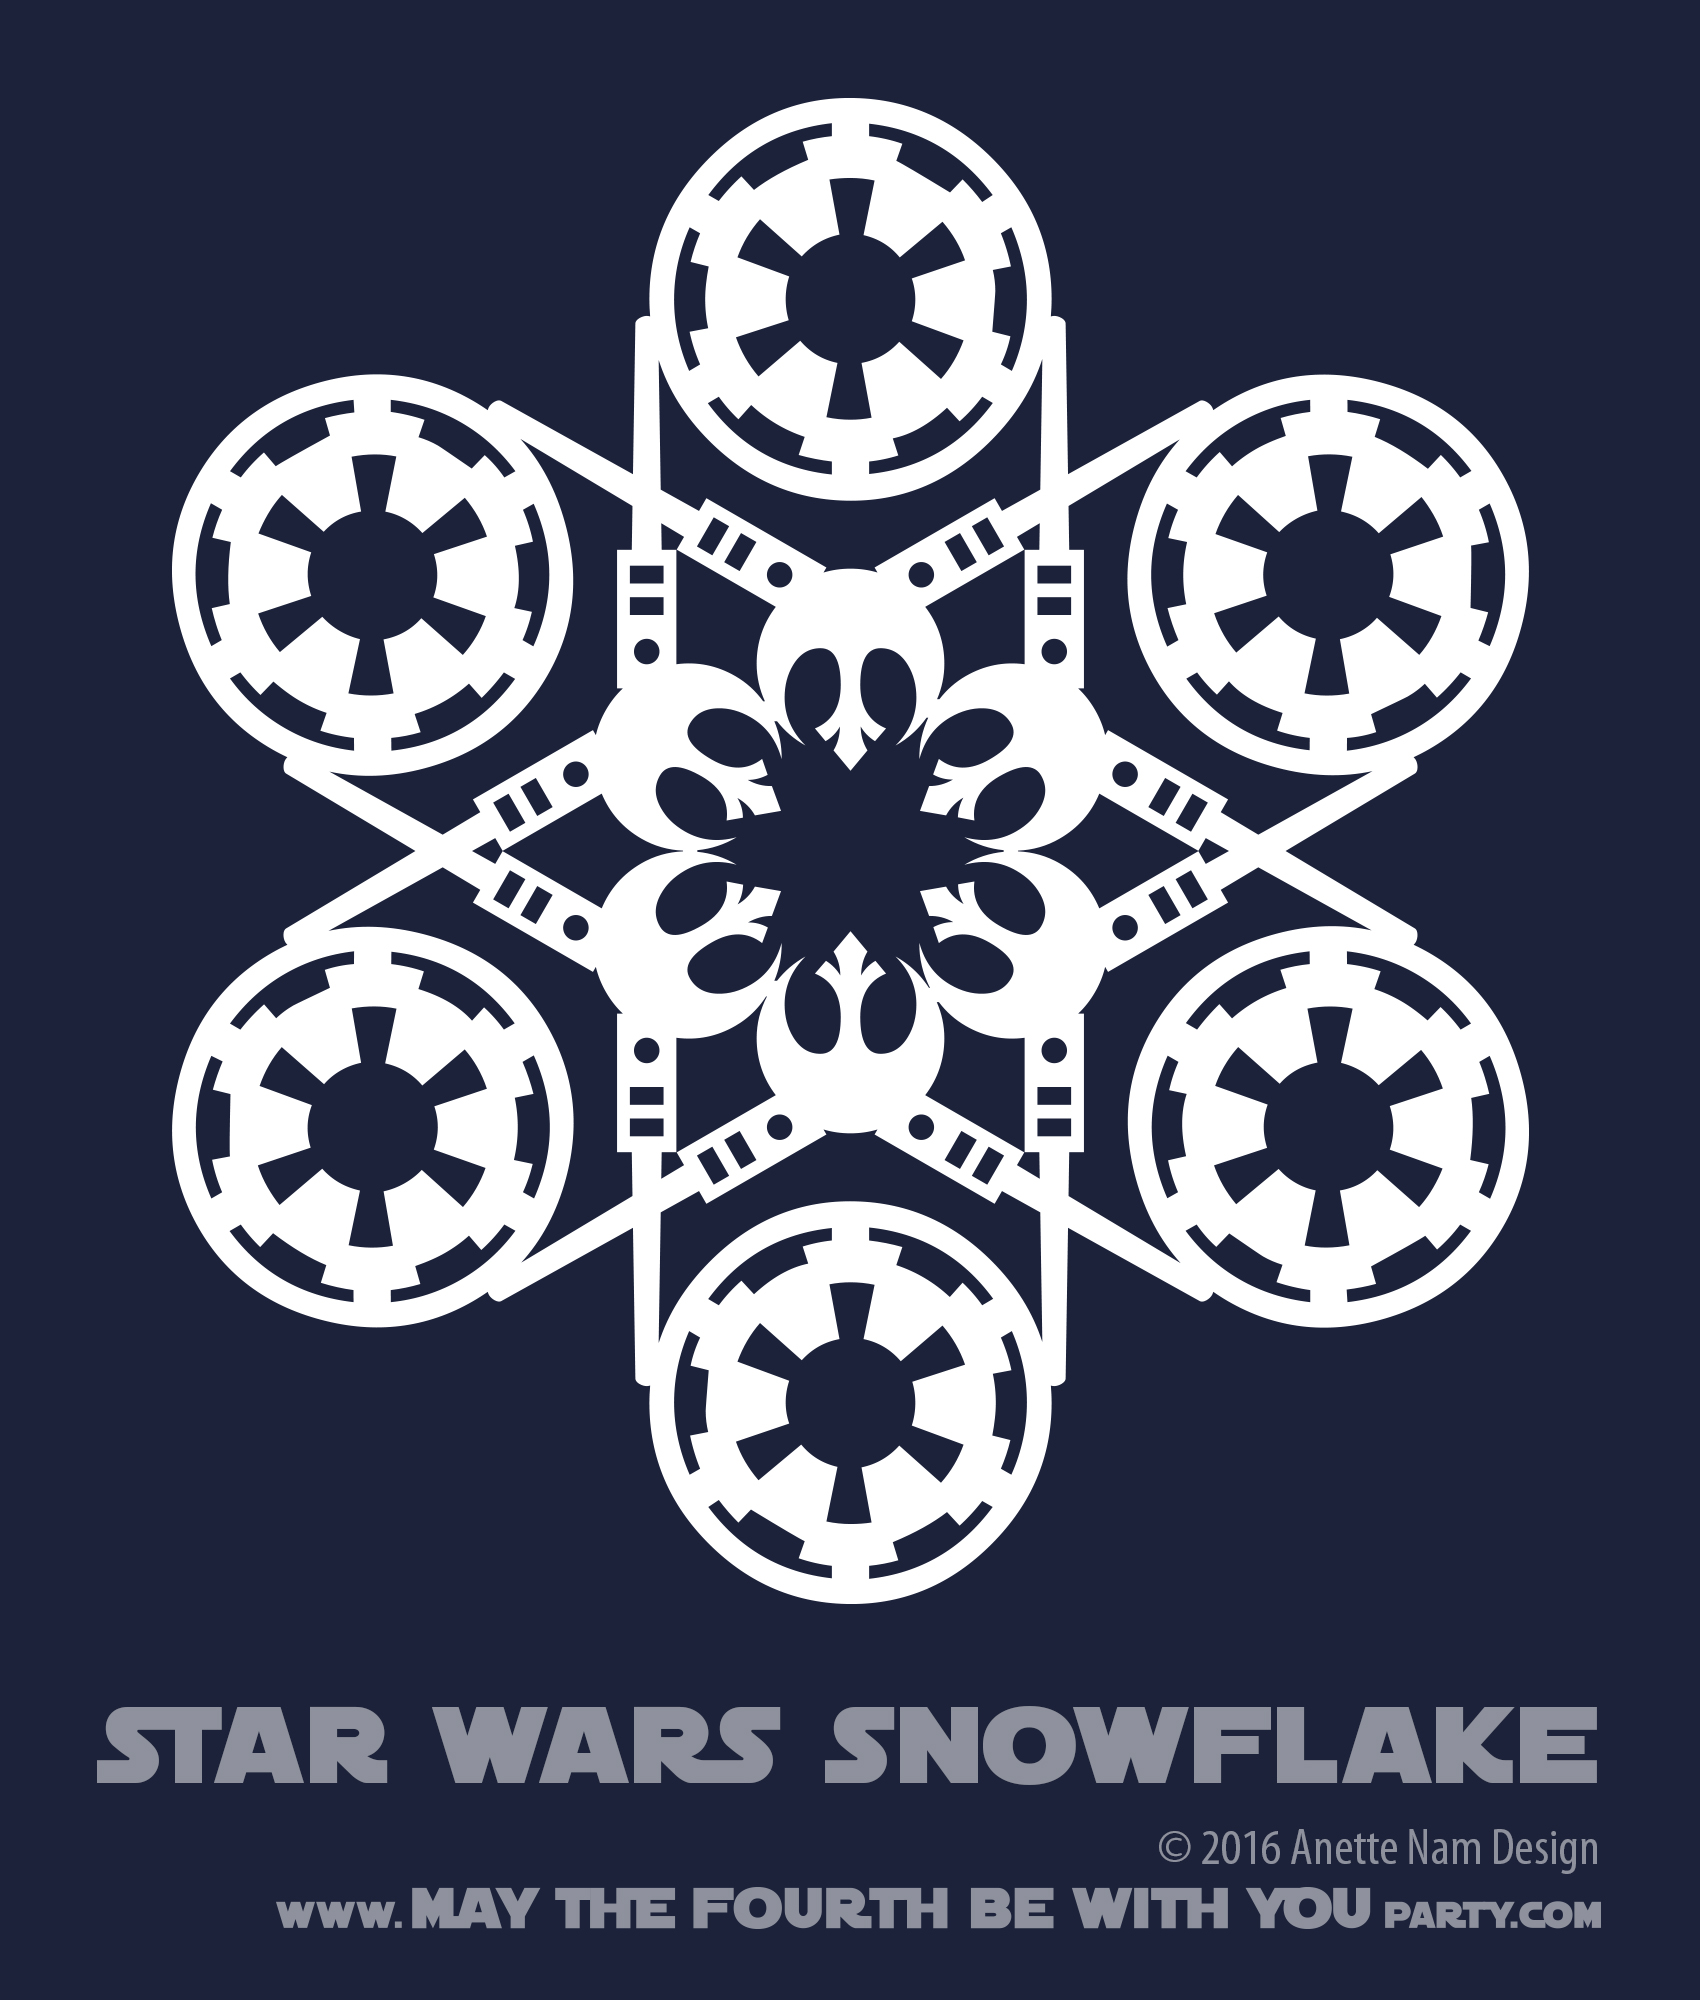 Star Wars Snowflake Template from maythefourthbewithyouparty.files.wordpress.com